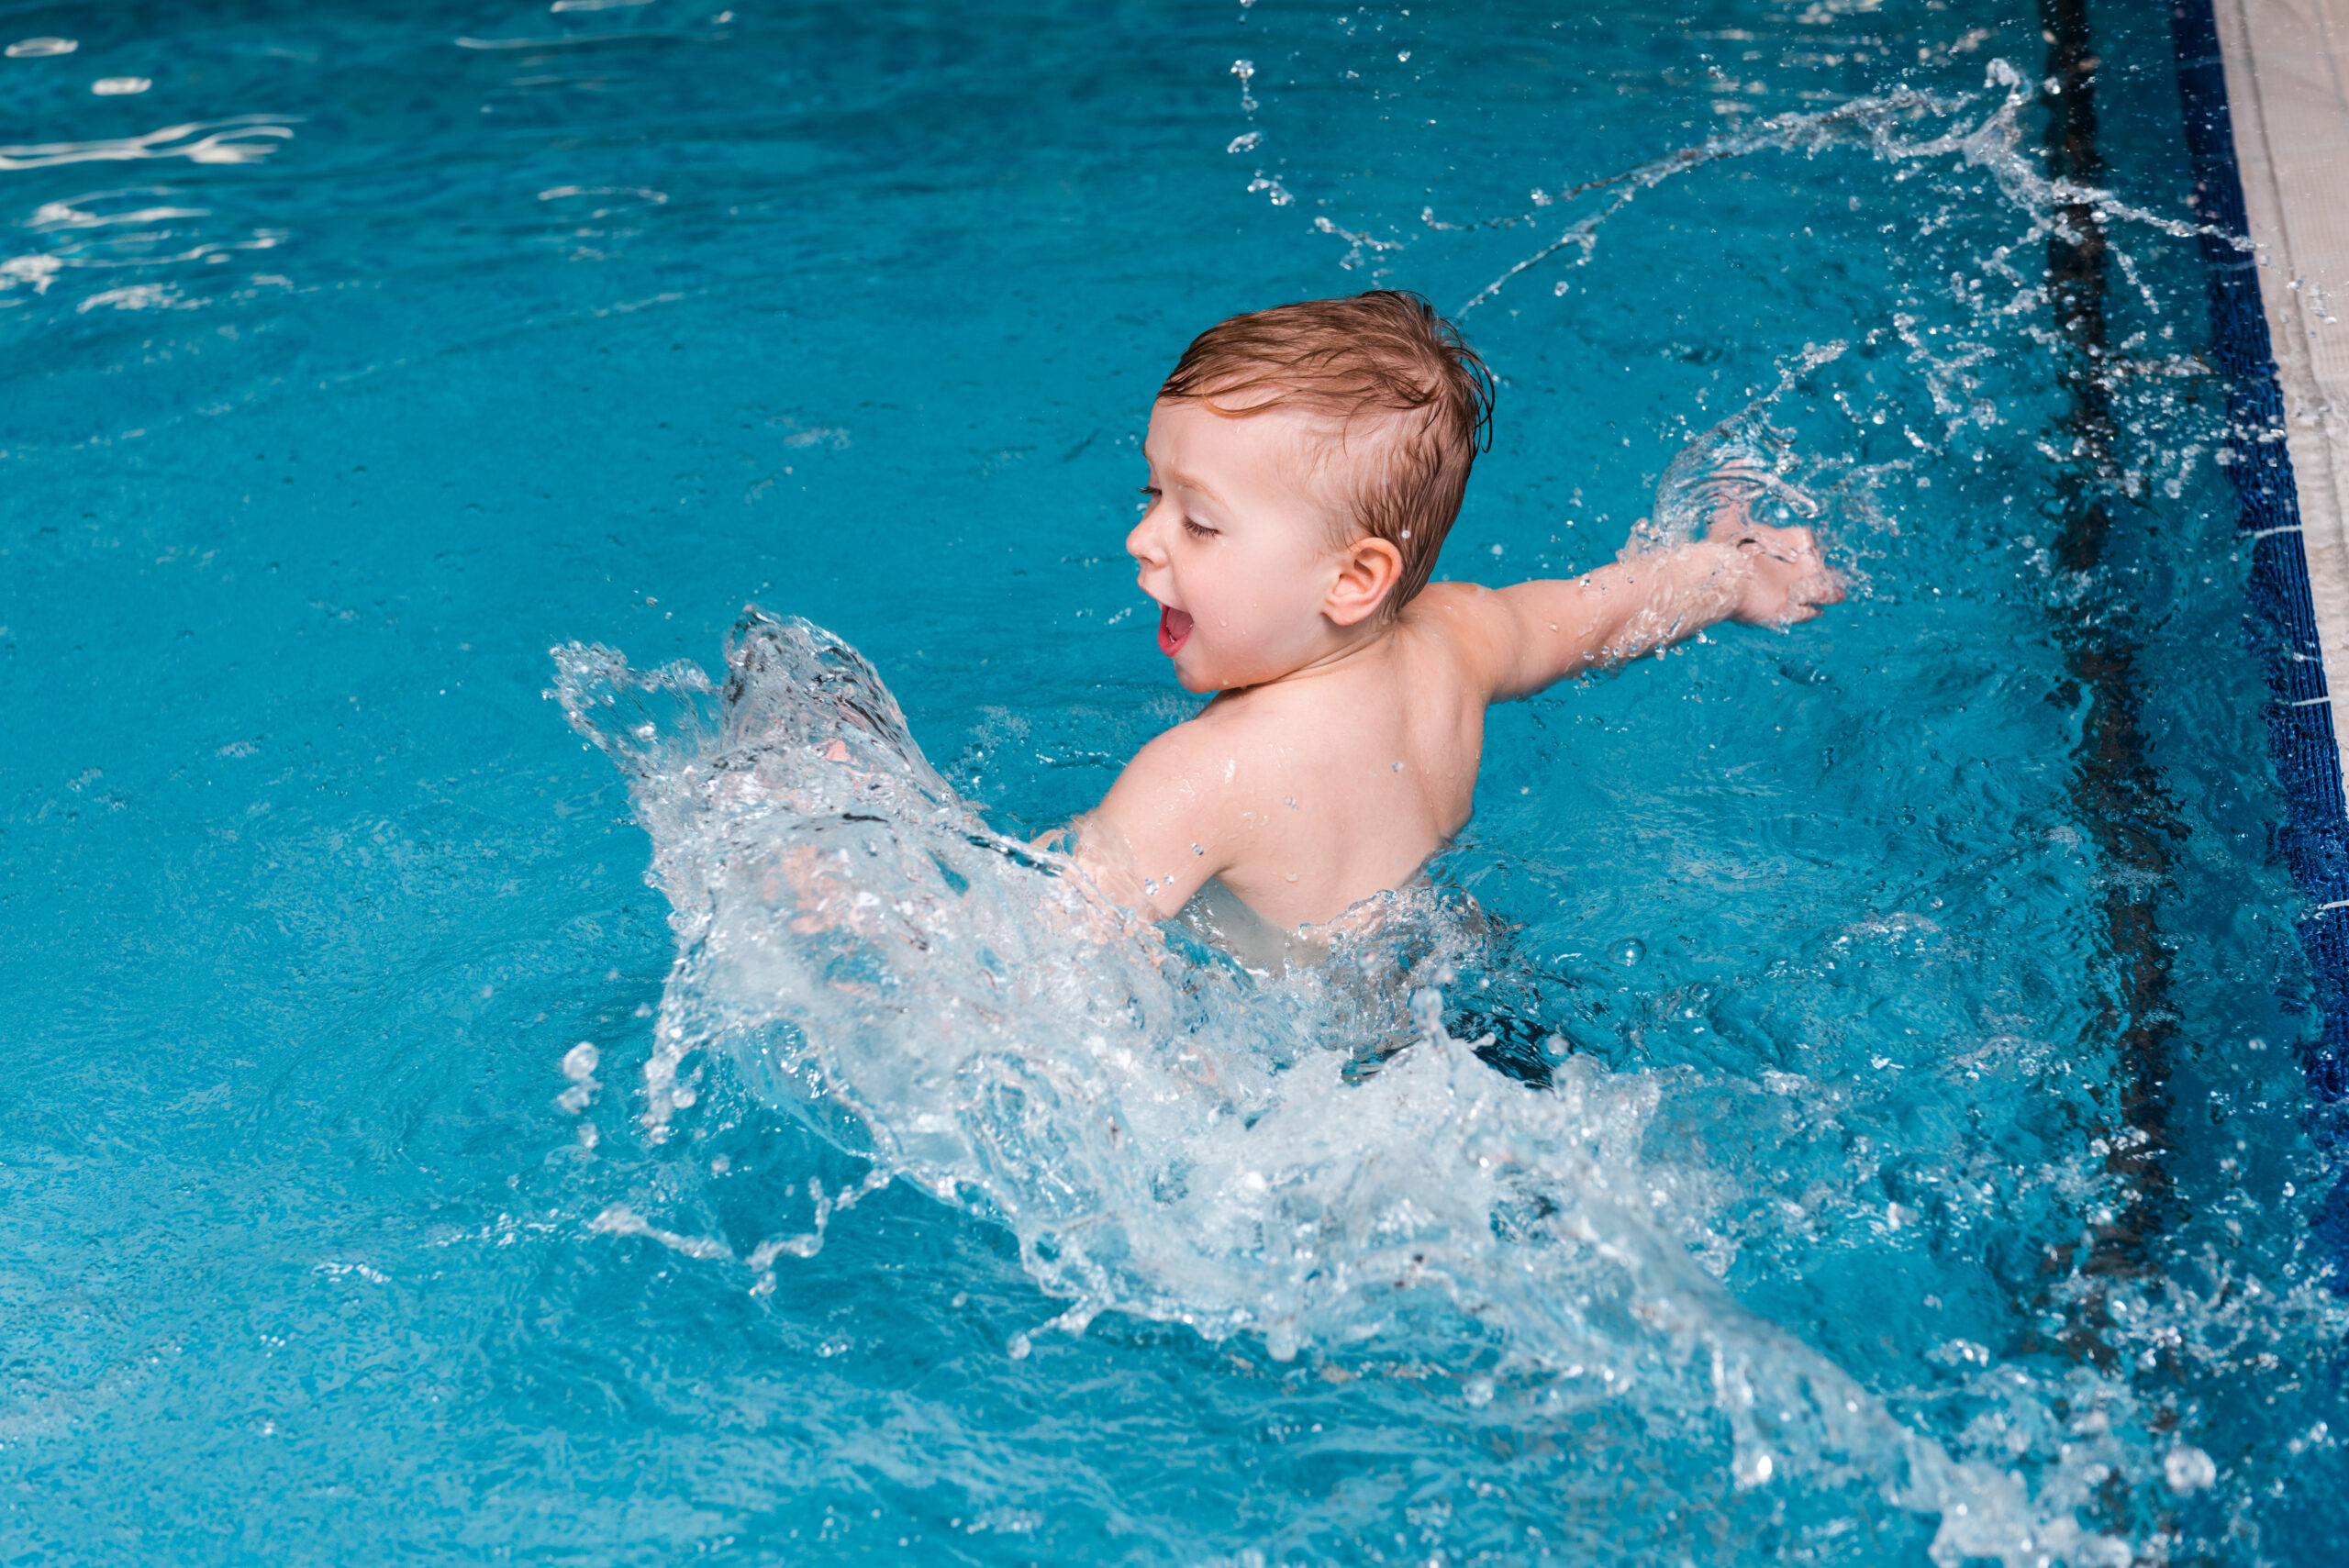 A baby in a swimming pool, gleefully splashing and enjoying their first experiences in the water